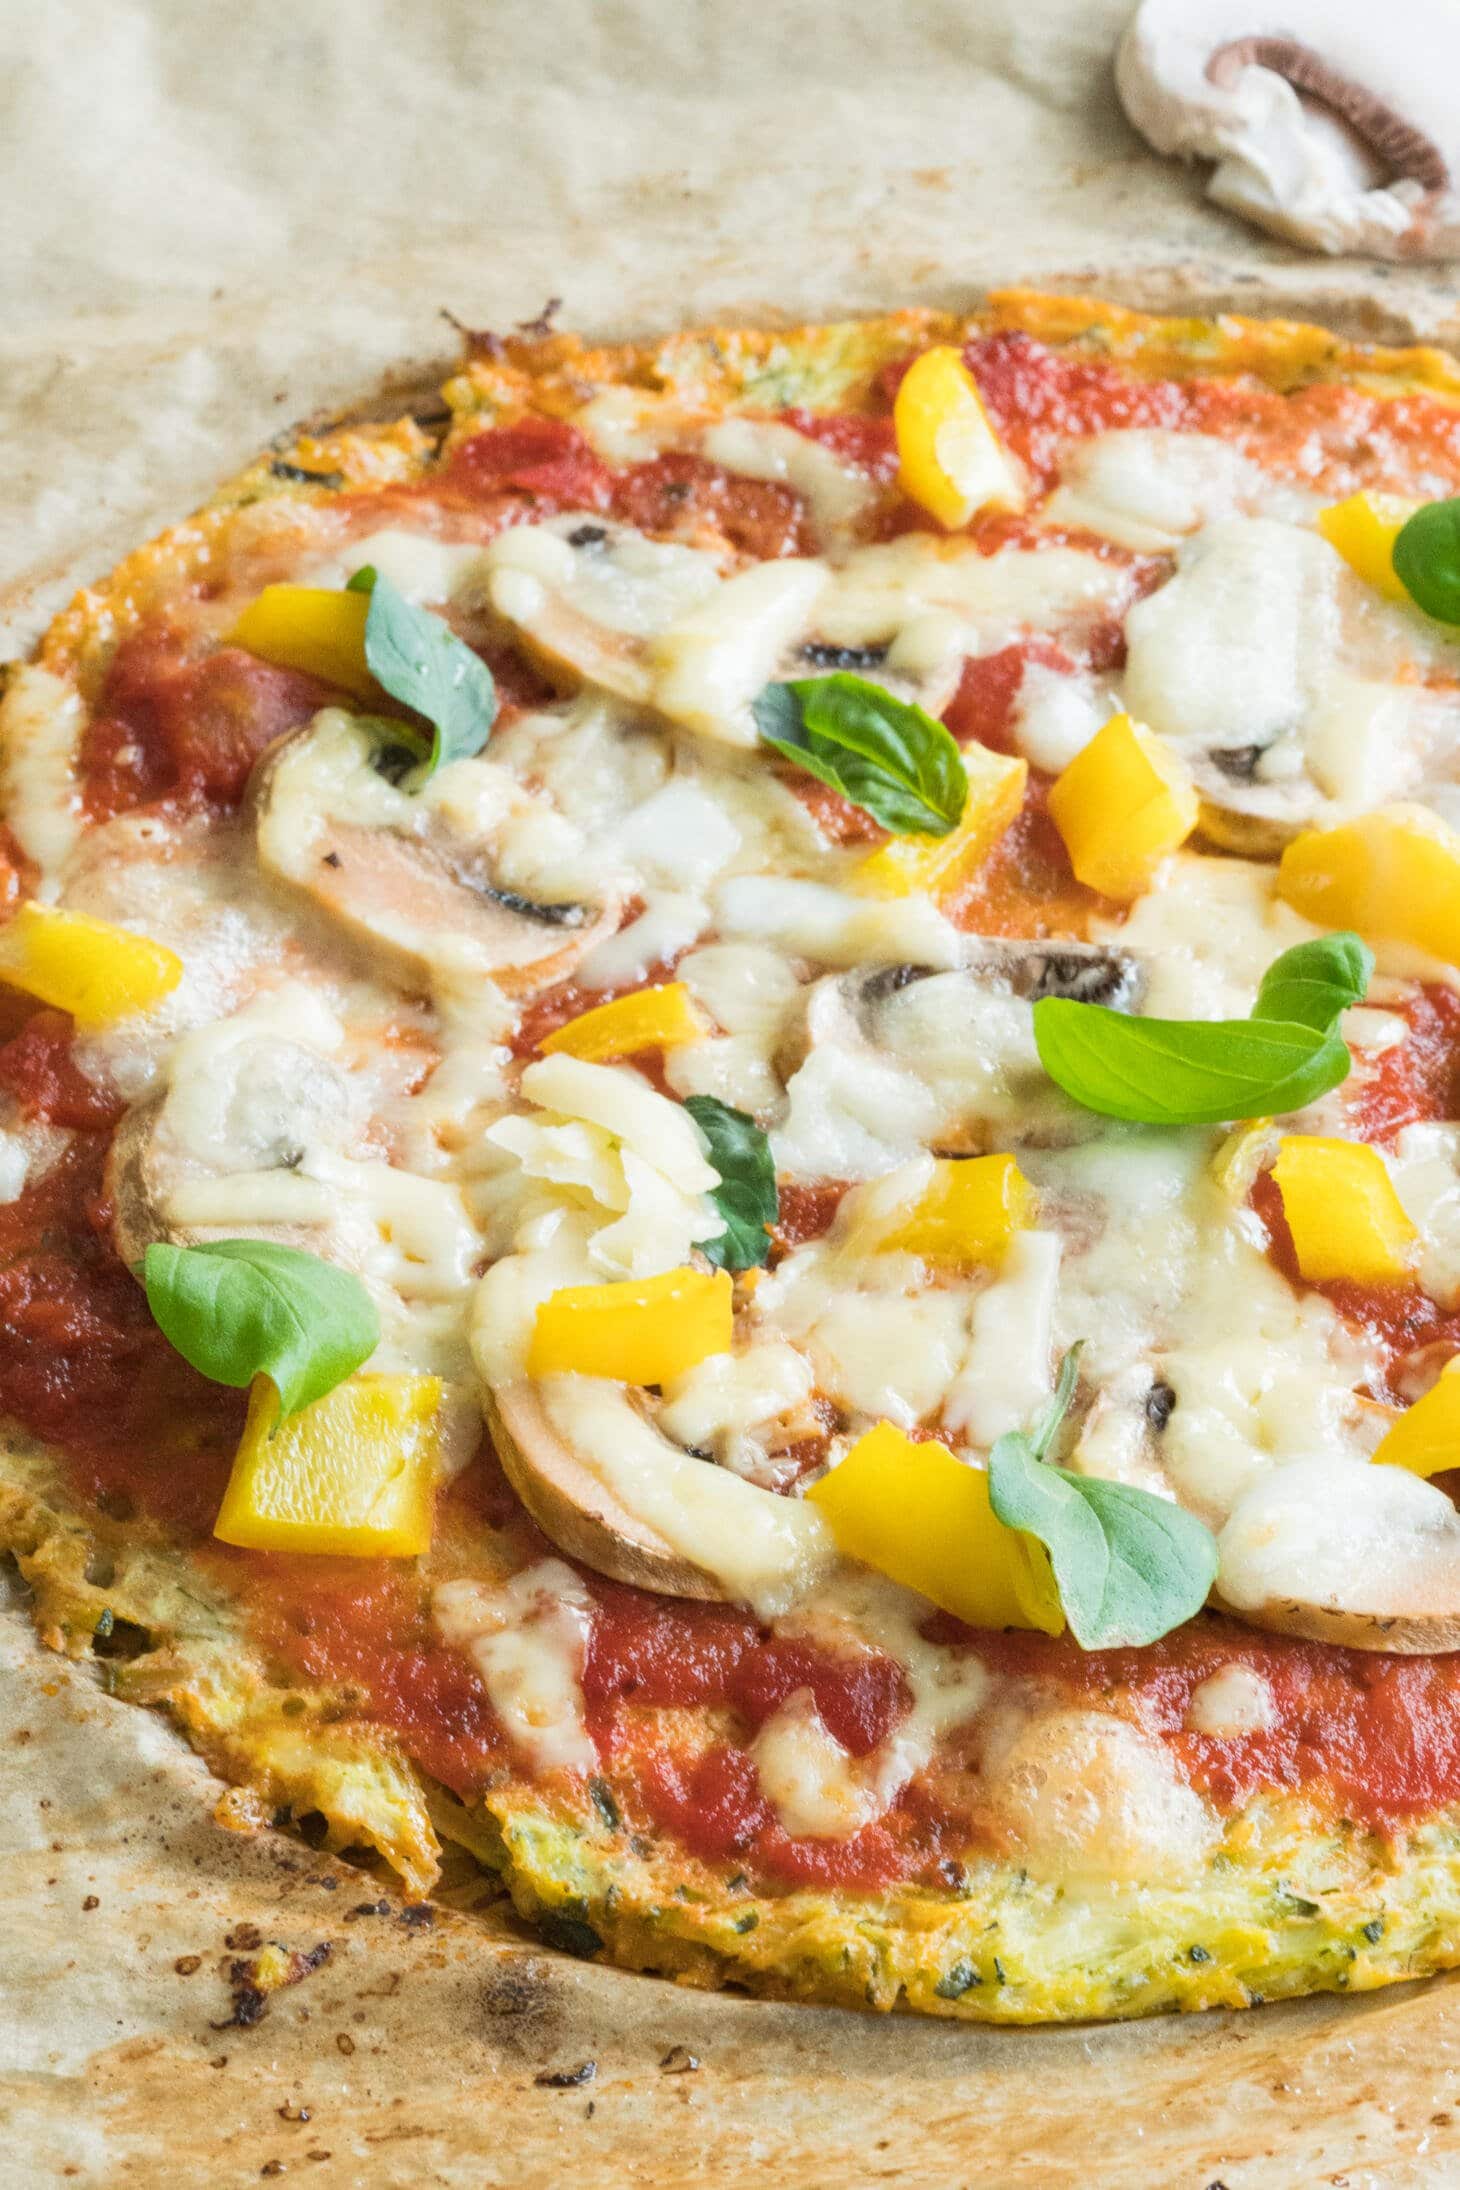 Low Carb Zucchini-Pizza ohne Teig